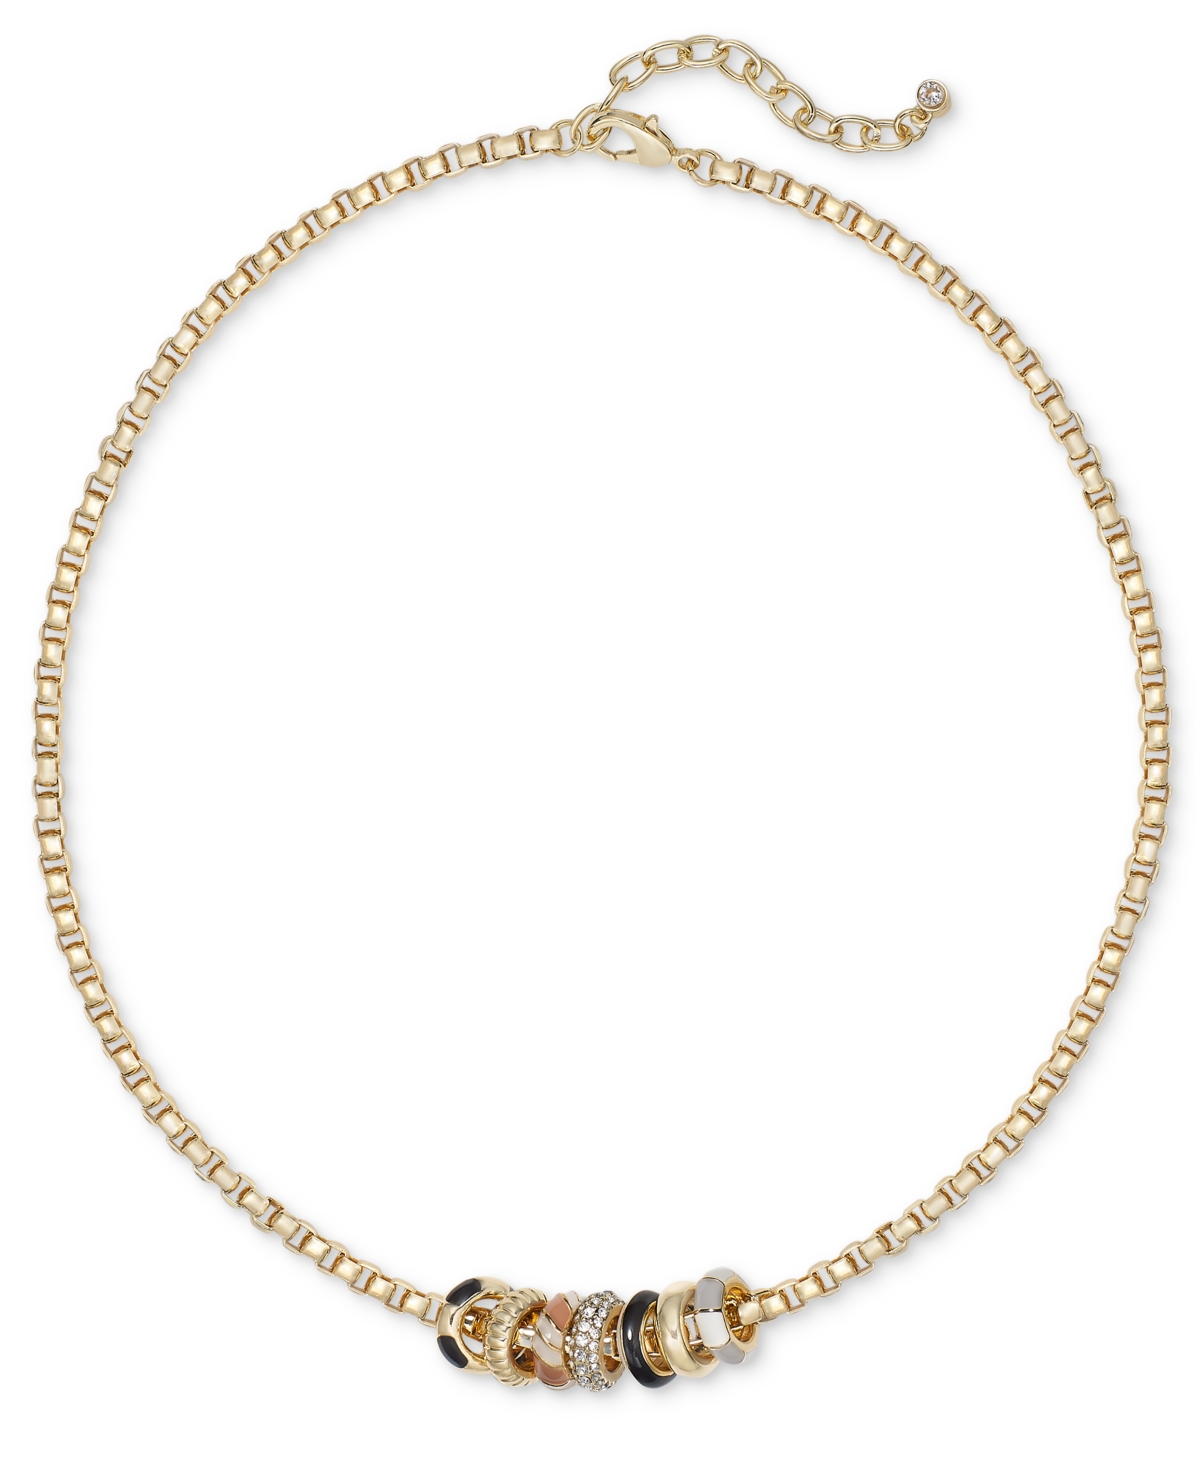 Gold-Tone Crystal & Color Bead Strand Necklace, 18" + 2" extender, Created for Macy's - Brown